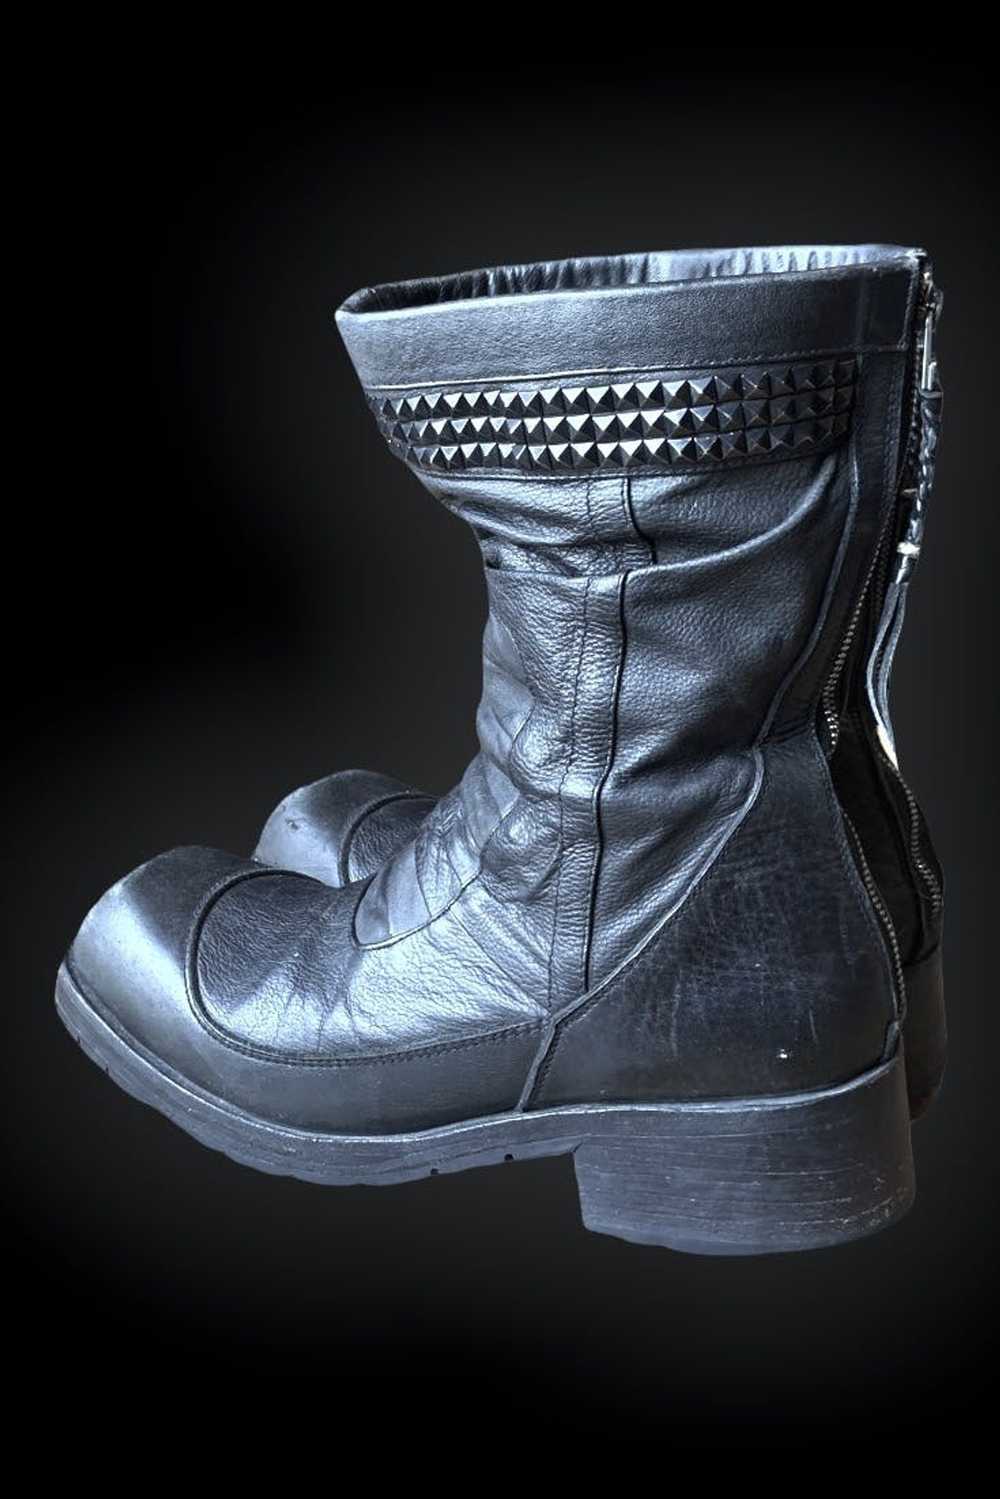 KMRii Kmrii boots - image 3